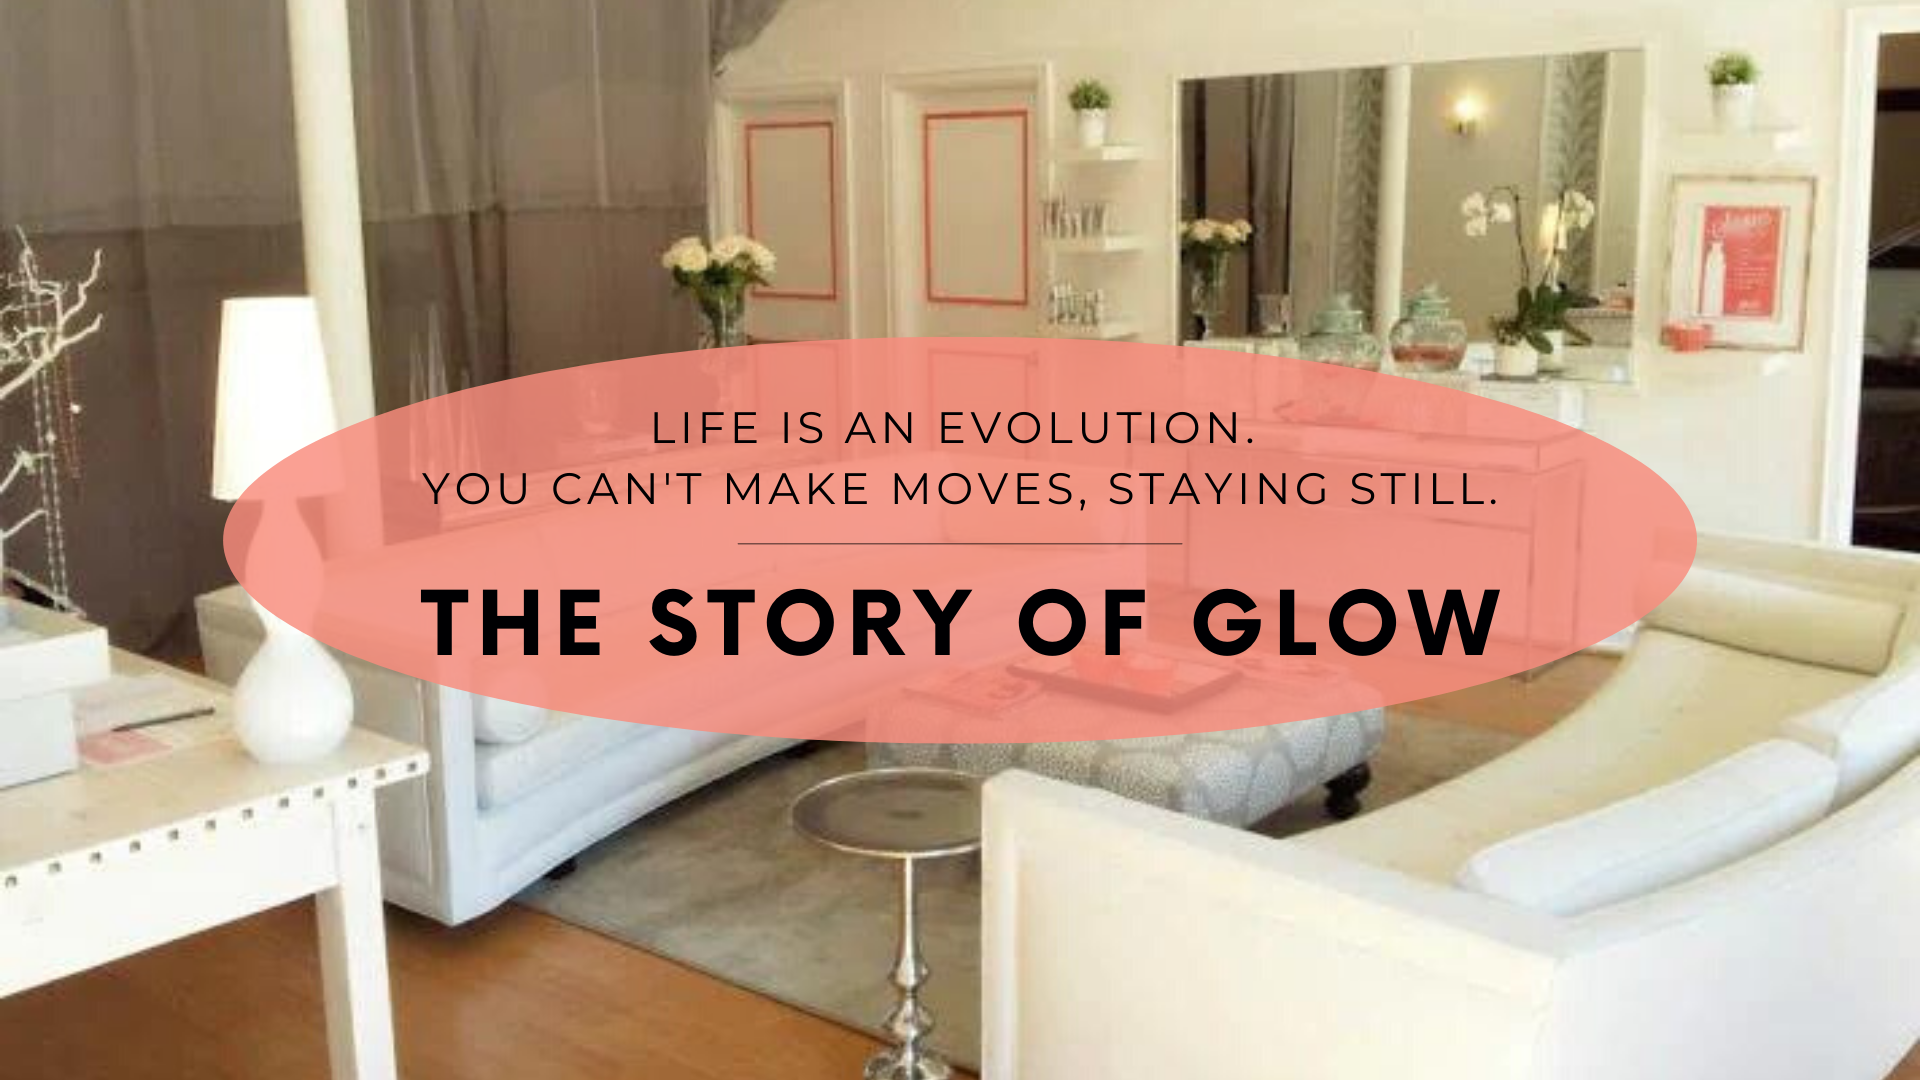 Life is an evolution. You can't make moves, staying still. The story of GLOW